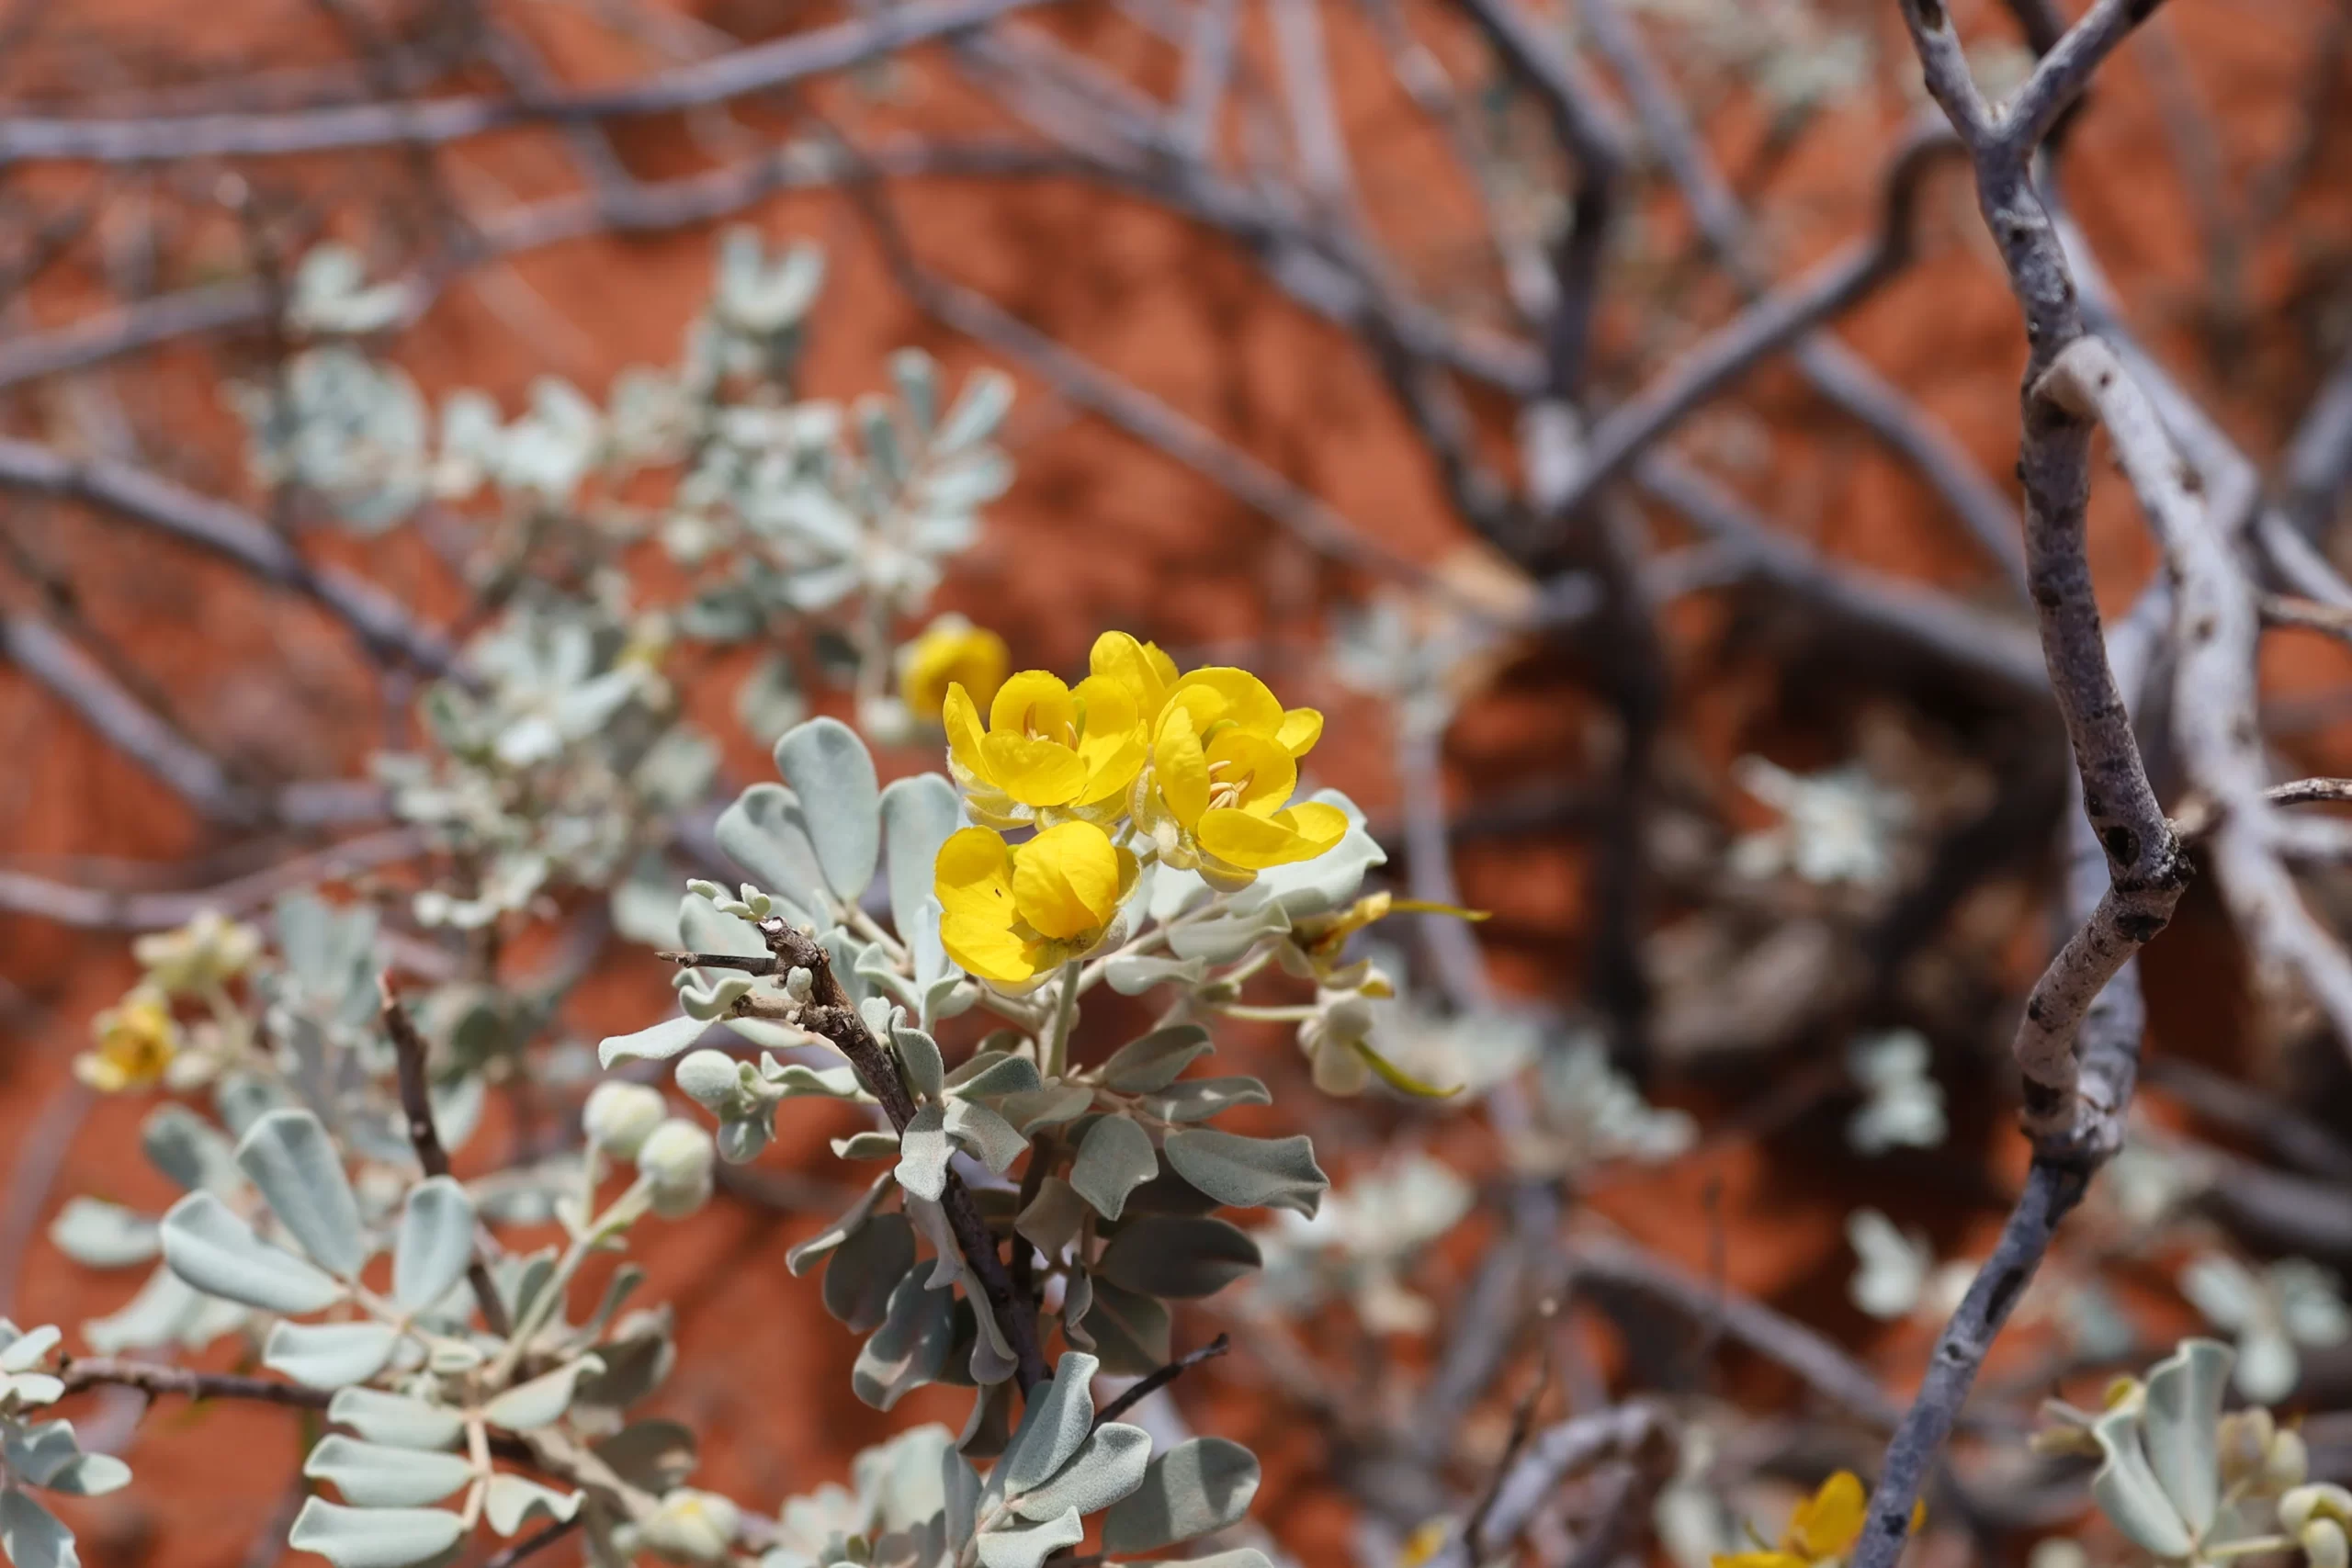 Senna artemisioides is a flowering plant that's endemic to Australia